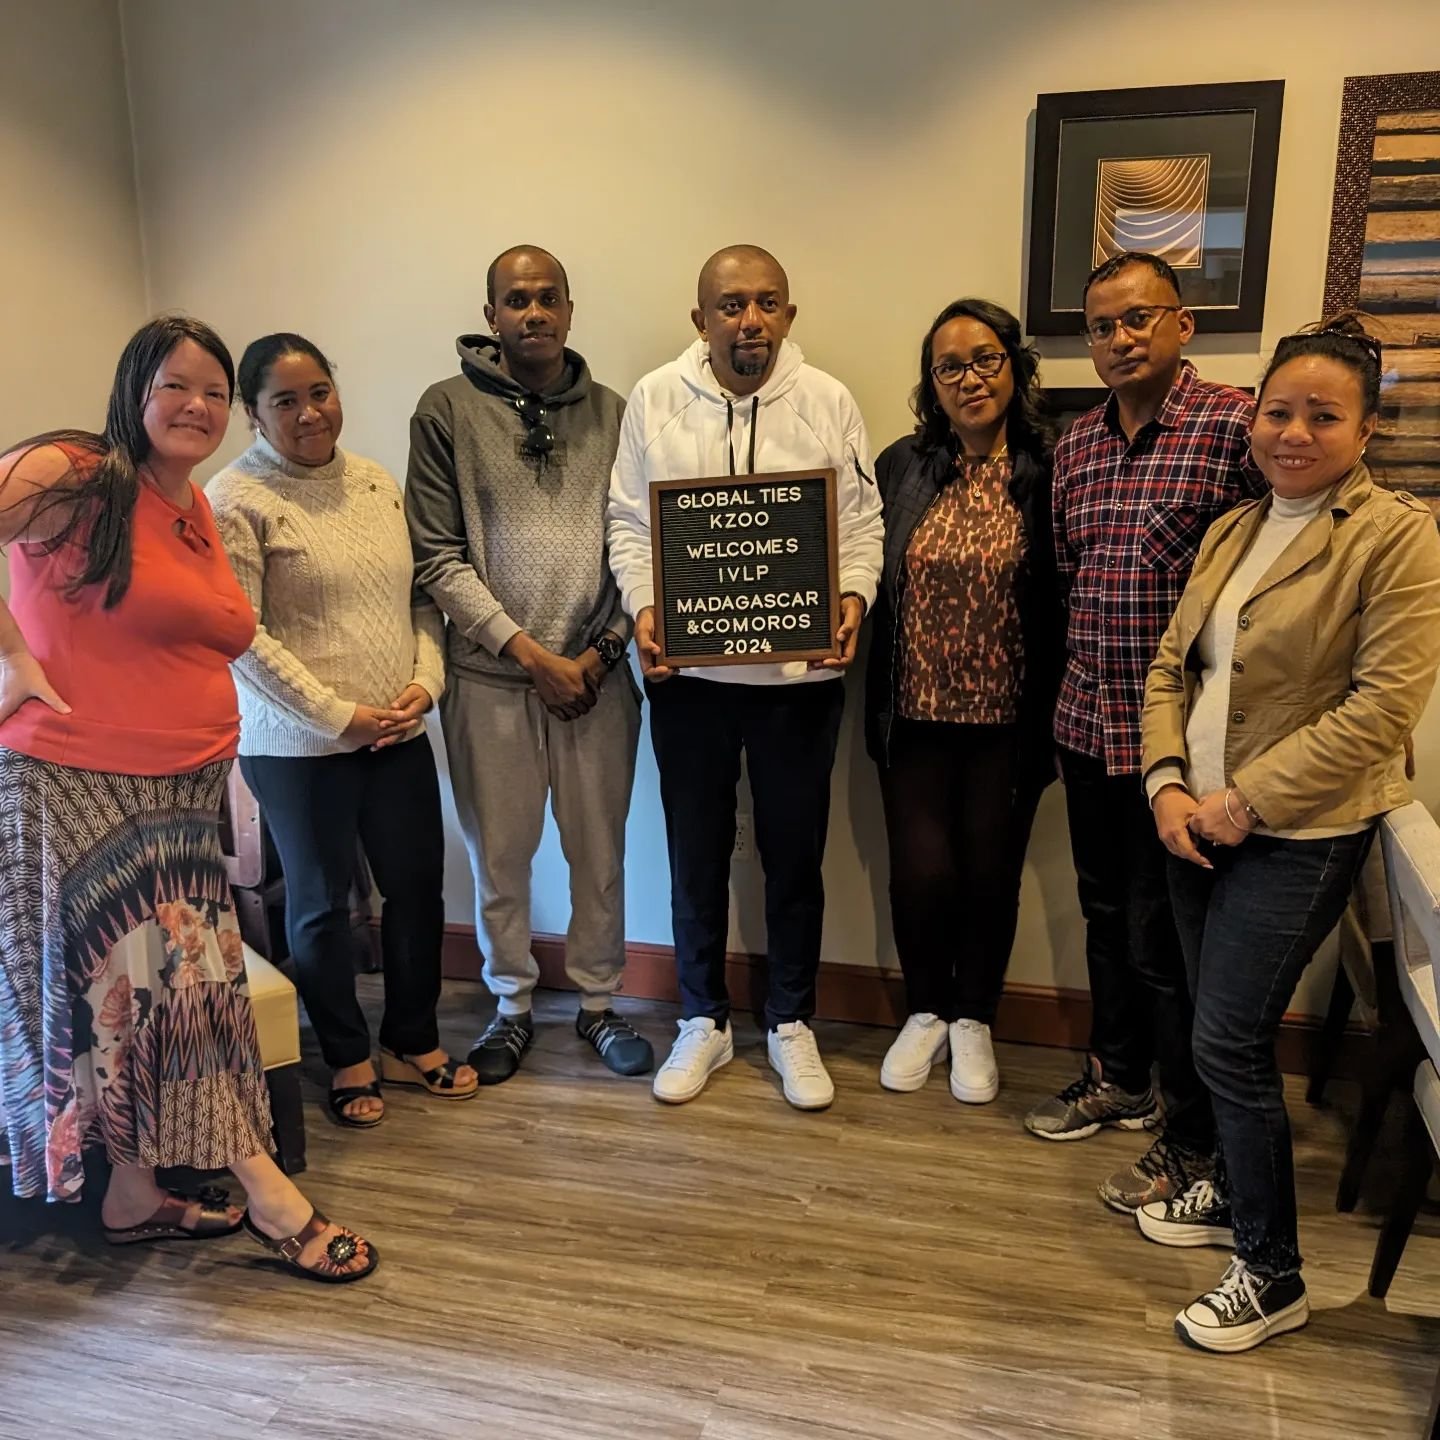 We were delighted to welcome this group of IVLP delegates from Madagascar and Comoros yesterday evening following some minor travel delays.

Adaptability is critical in the work that we do, and we're so grateful for our devoted team and collaborators